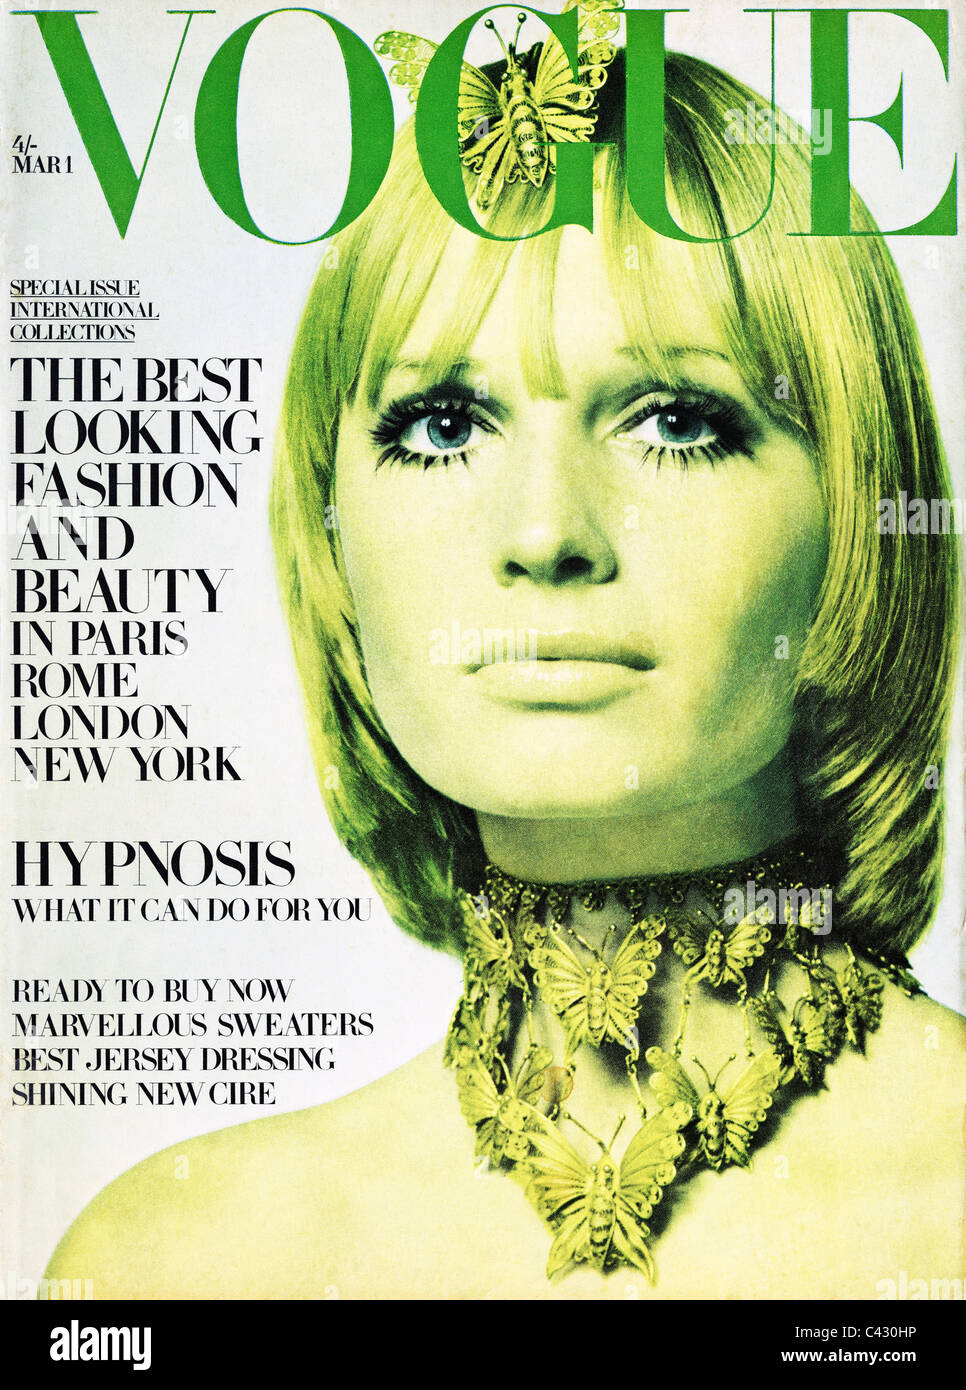 Cover of Vogue magazine 1st March 1969 photograph by David Bailey Stock Photo